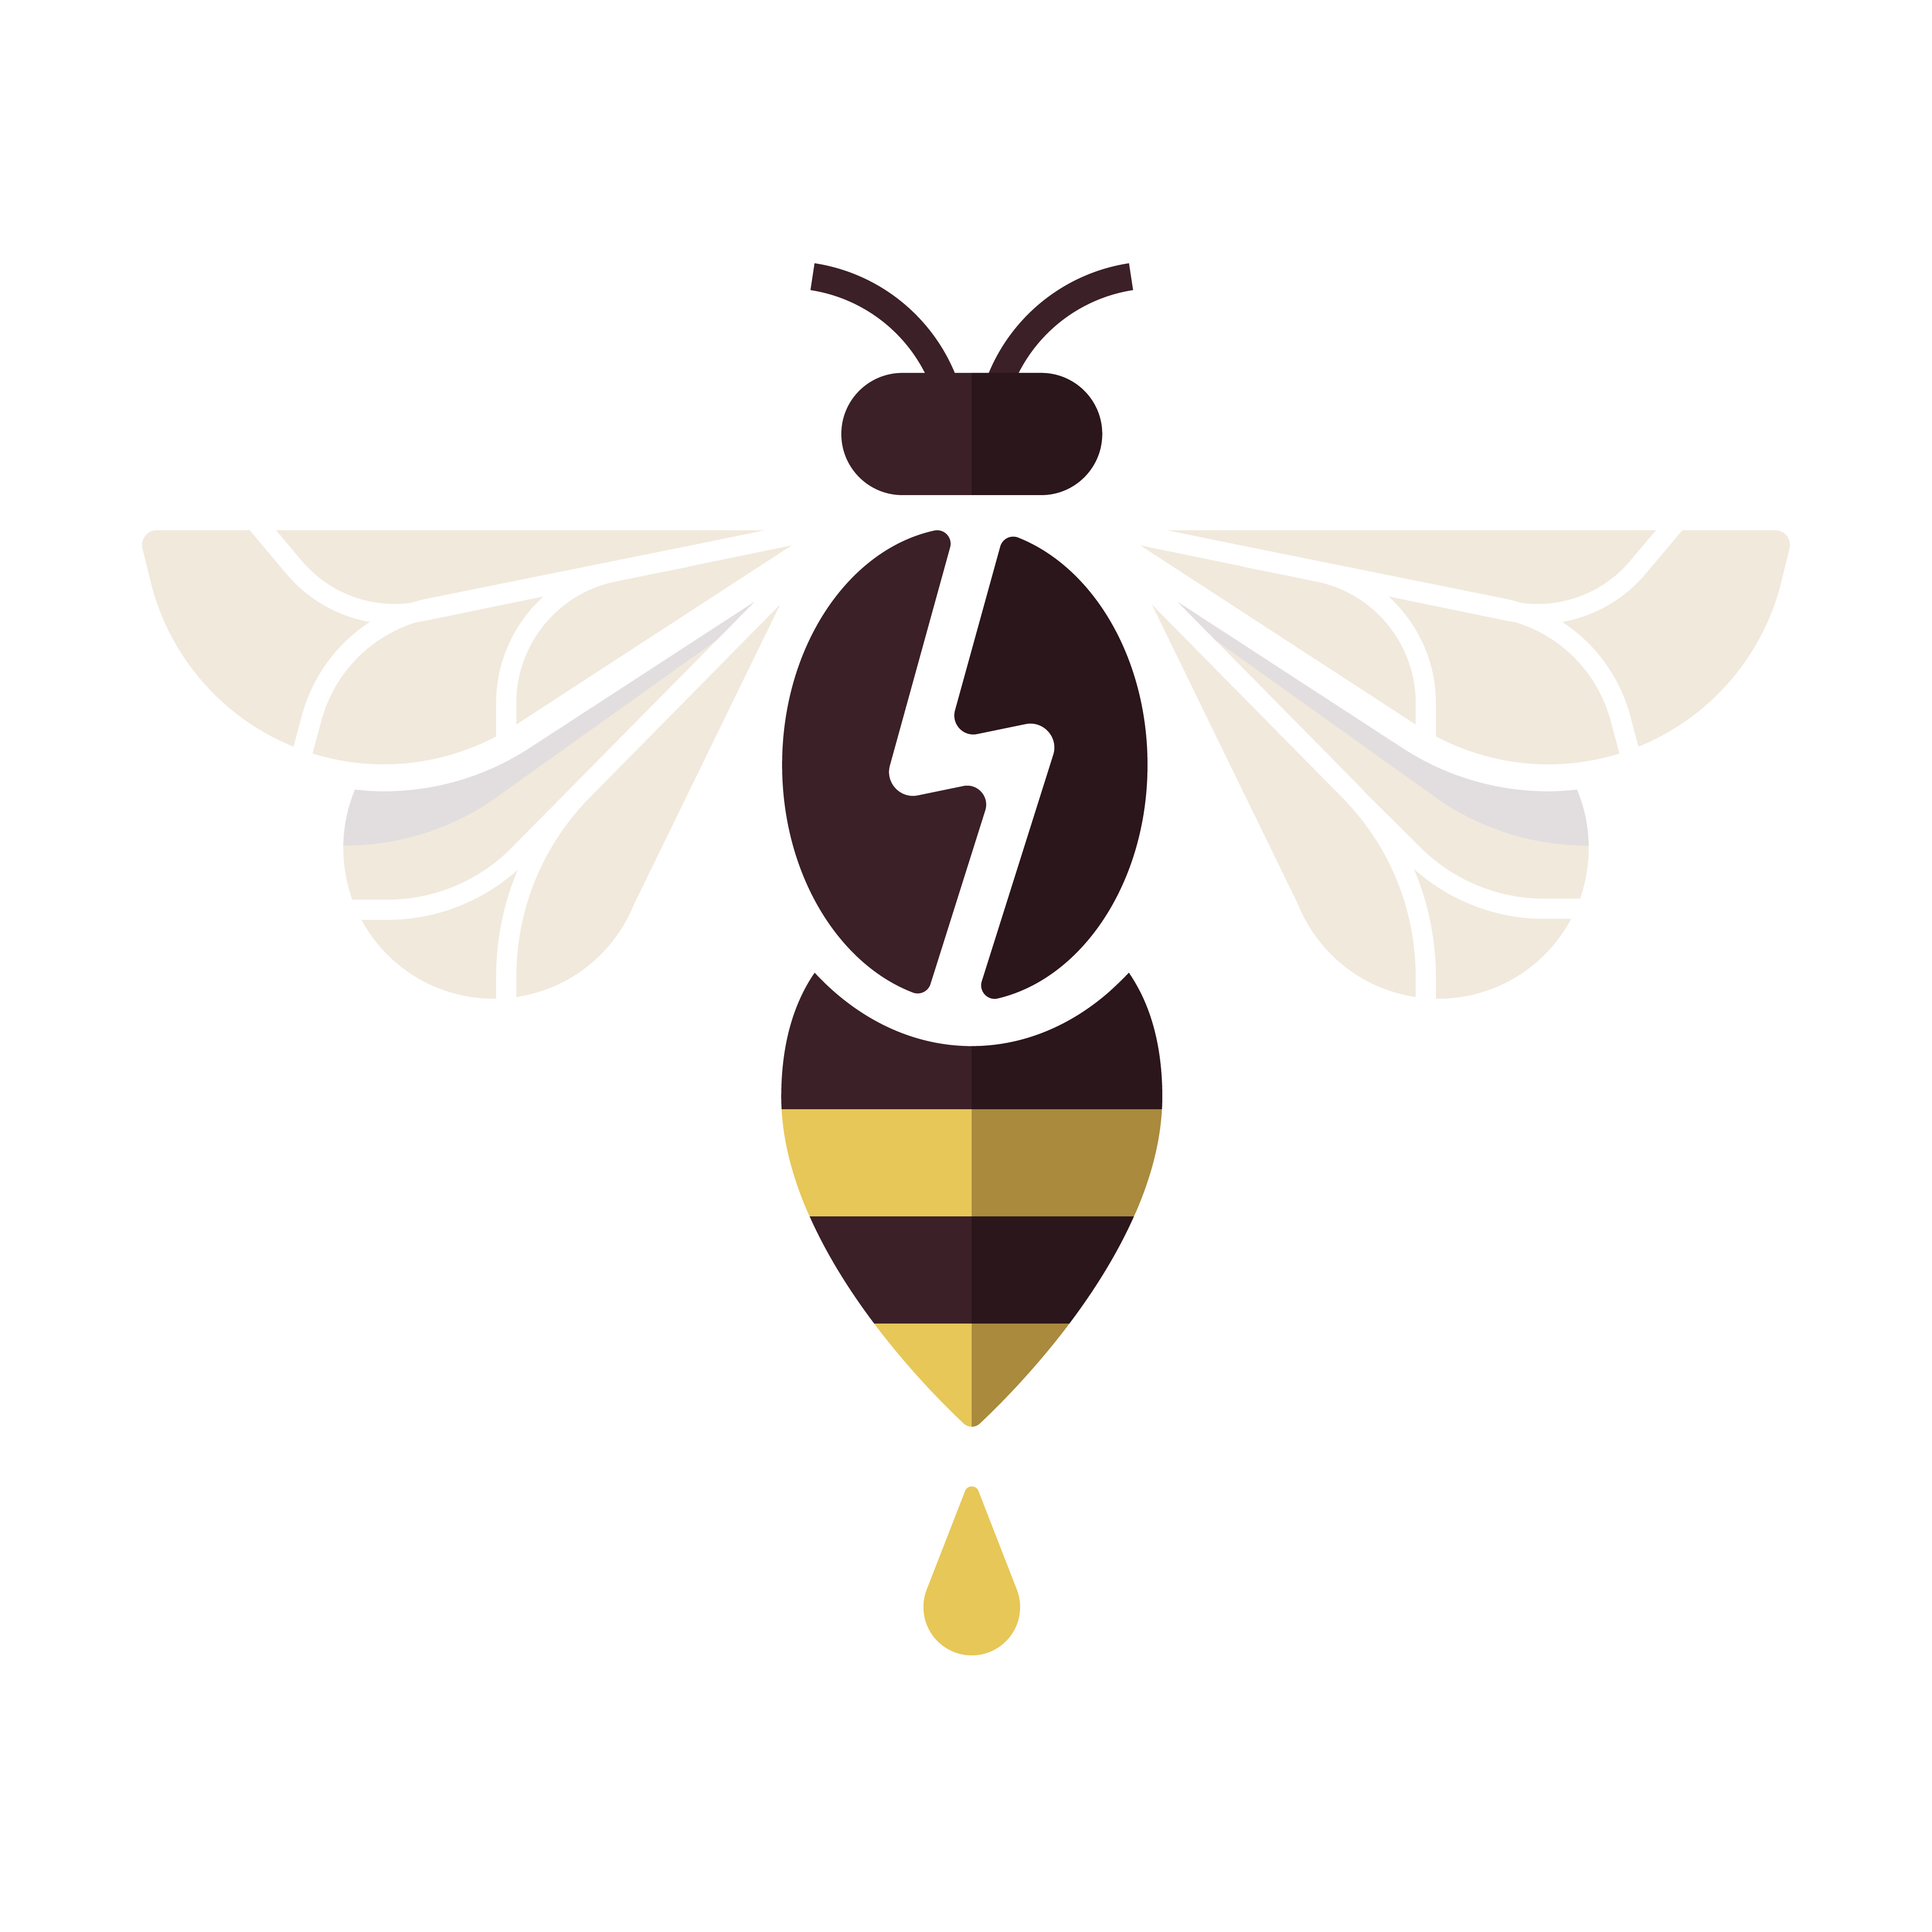 Buzz Coffee logo design by logo designer Trey Ingram for your inspiration and for the worlds largest logo competition